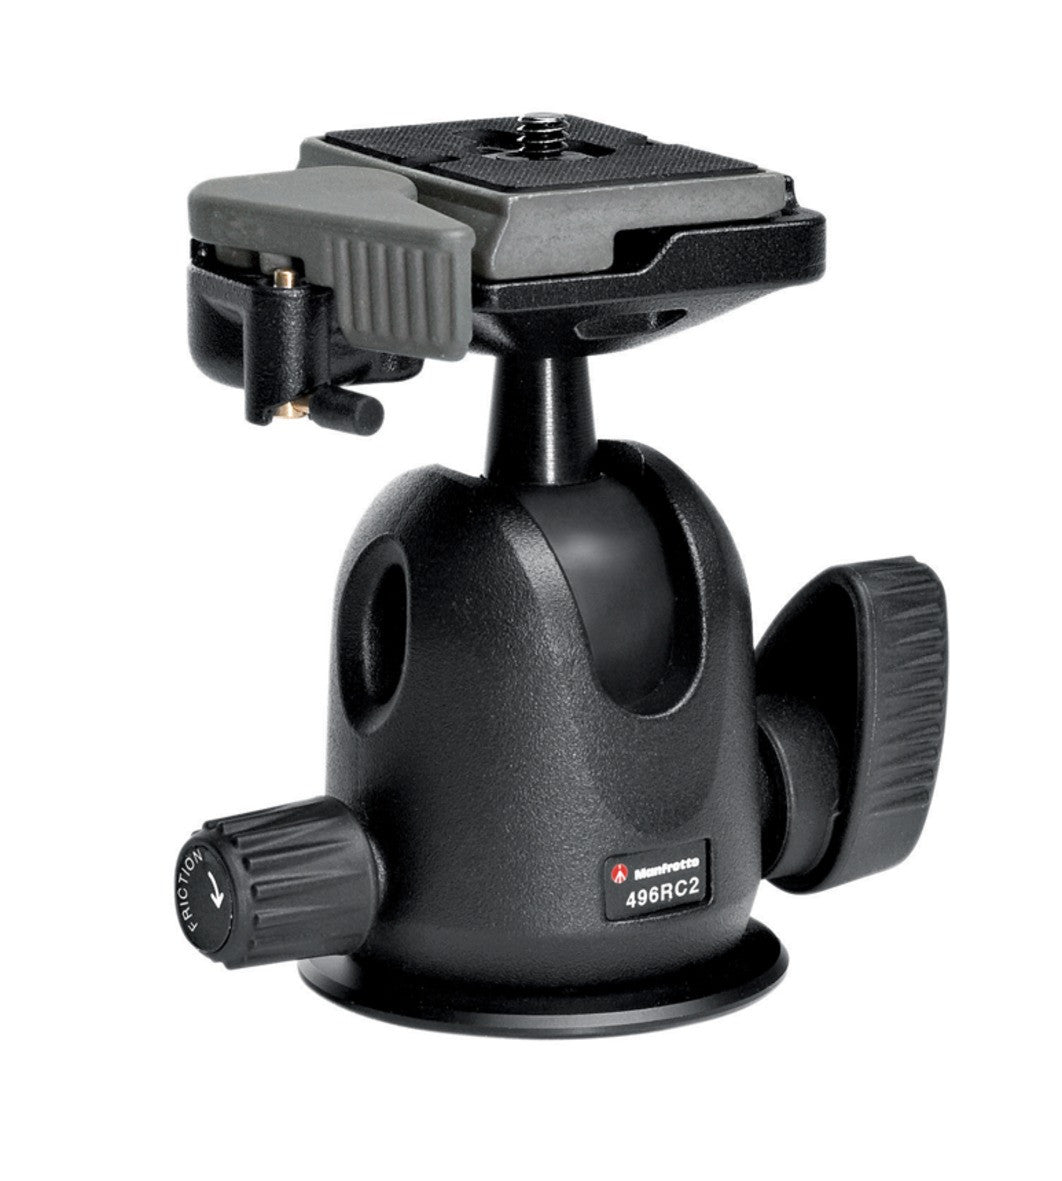 Manfrotto 496RC2 Compact Ball Head, tripods ball heads, Manfrotto - Pictureline 